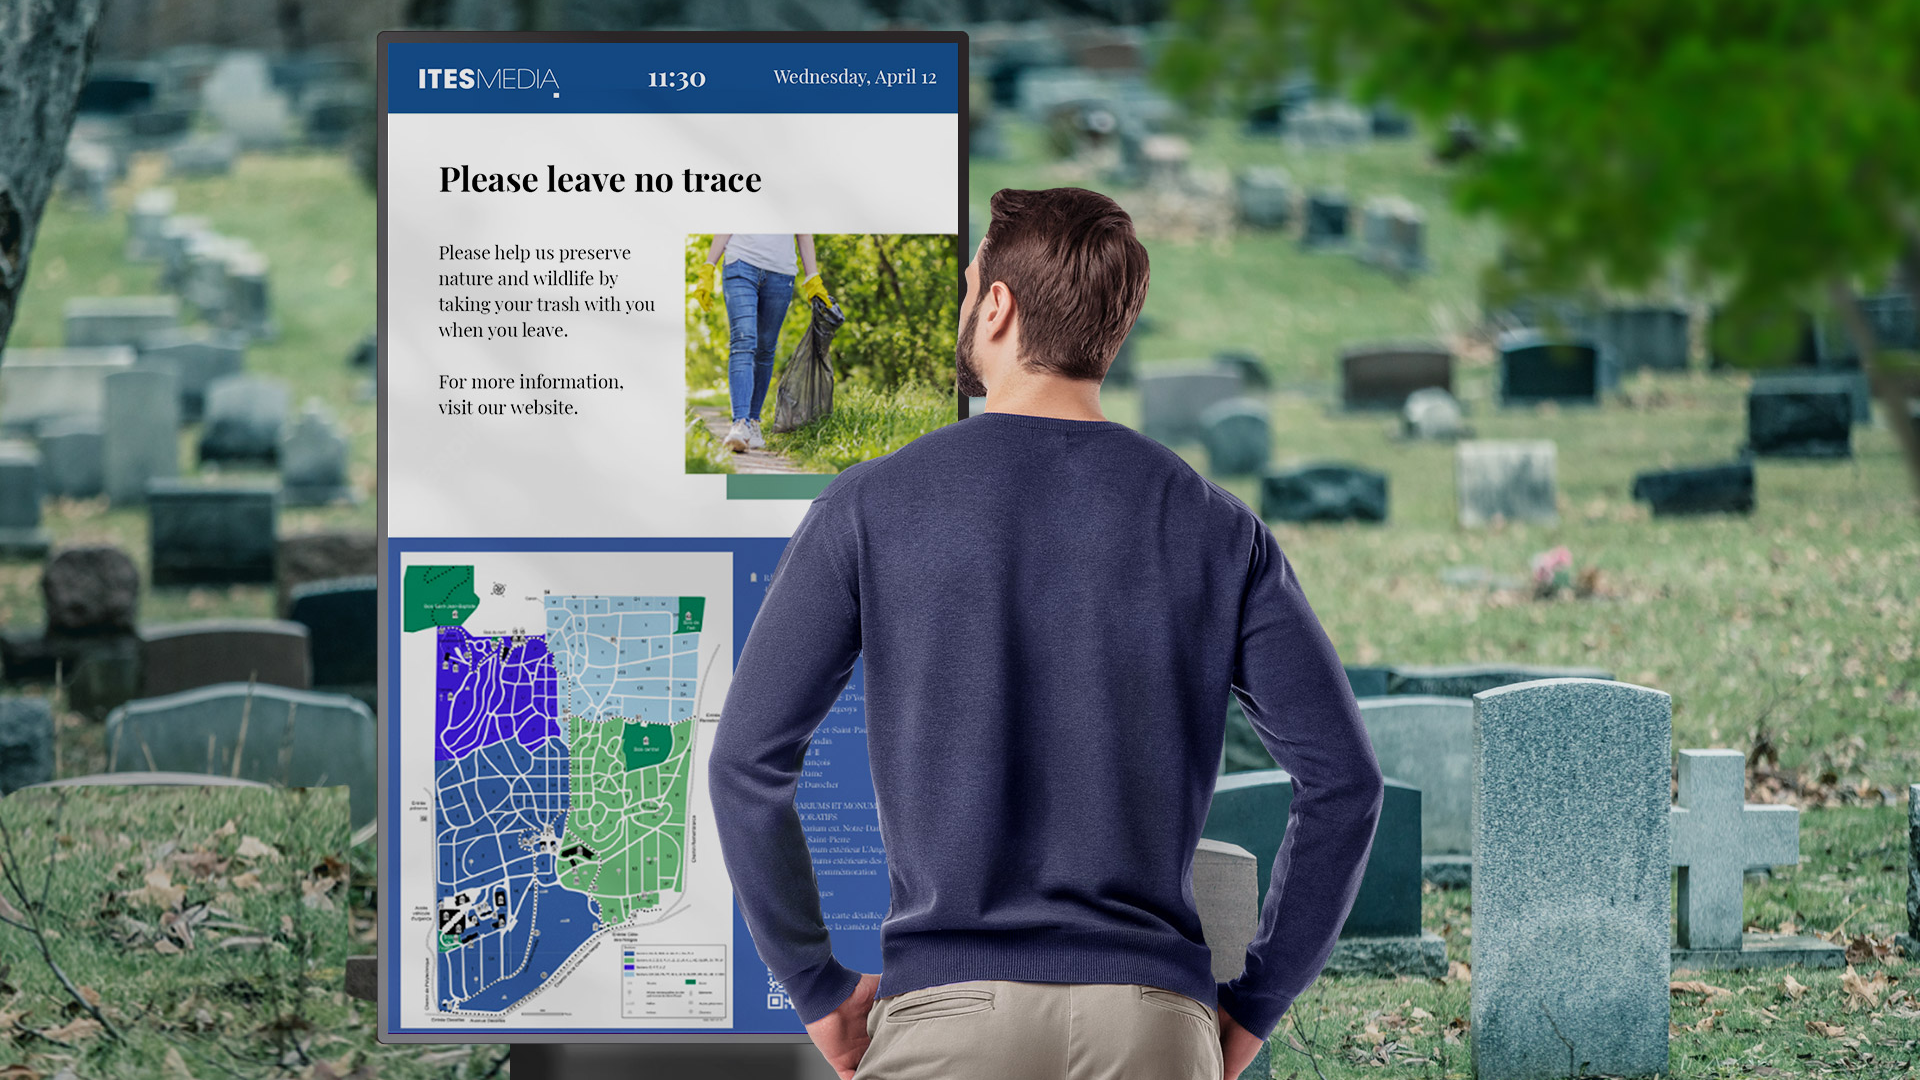 Digital signage solution for cemeteries